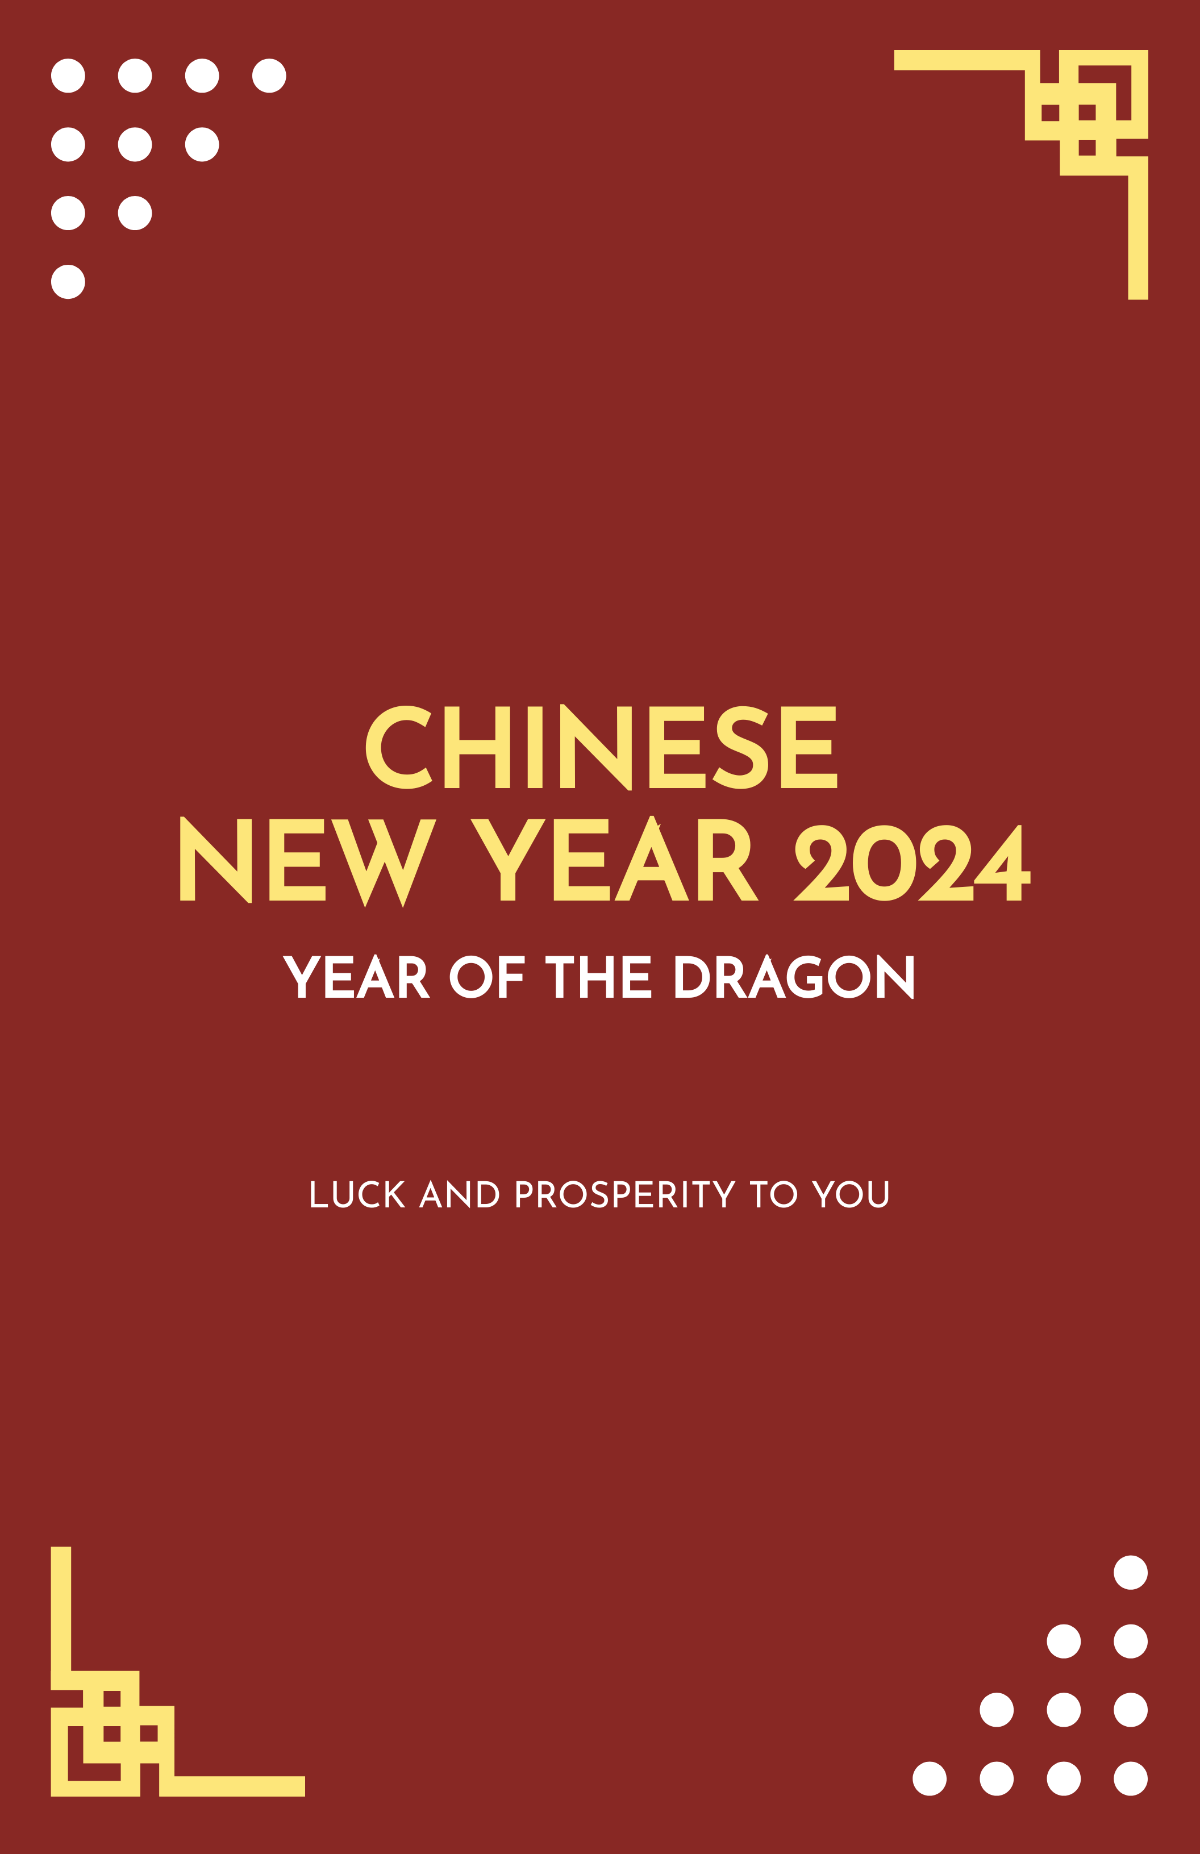 Modern Chinese New Year Poster Template